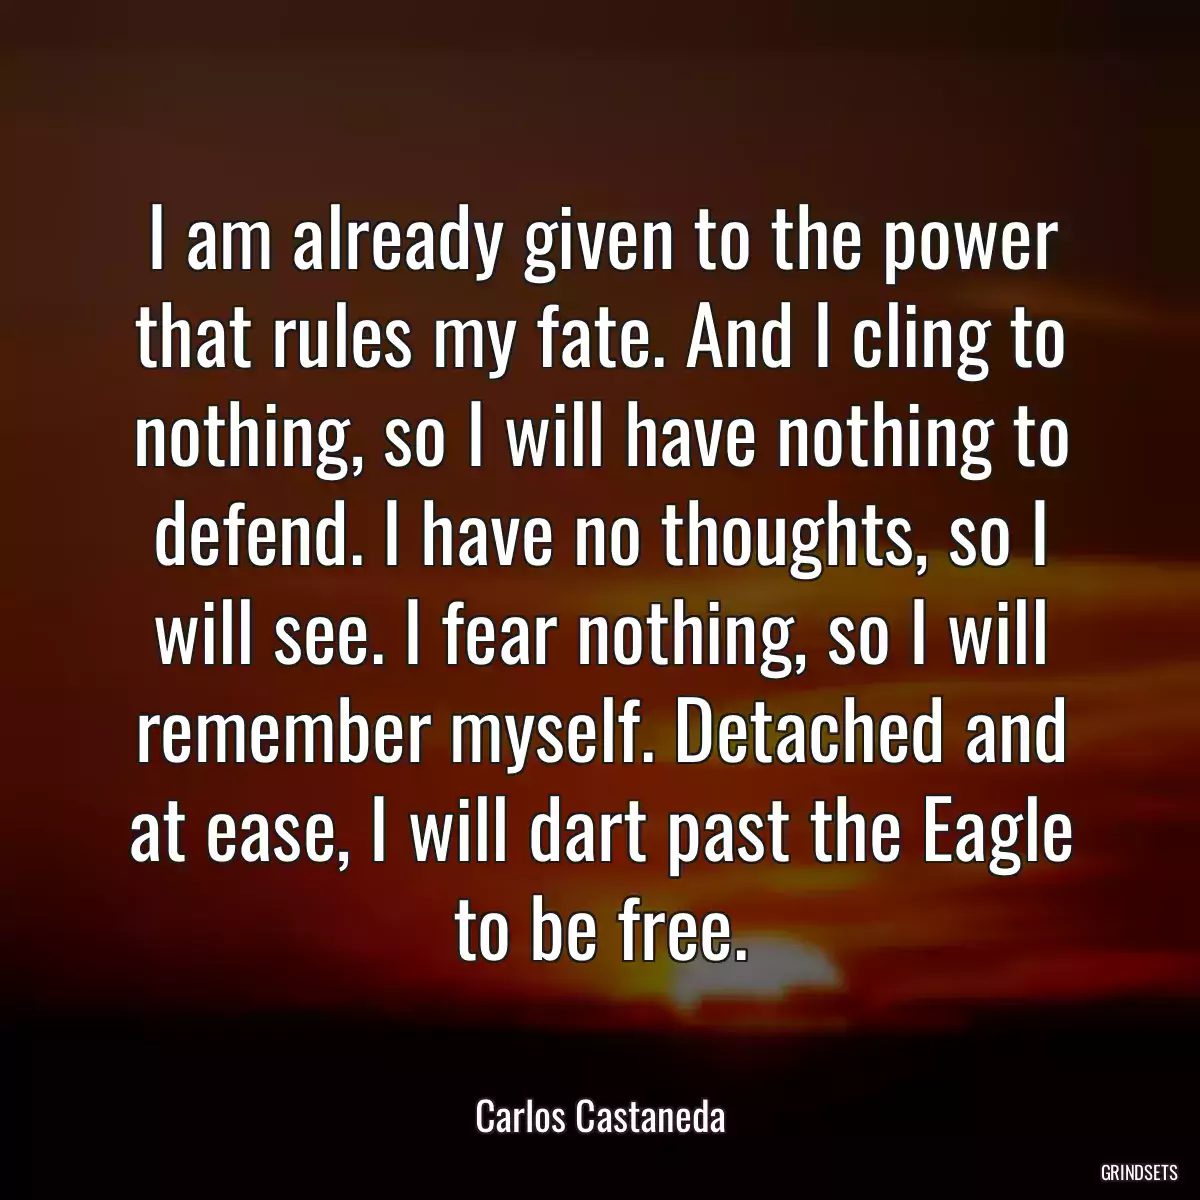 I am already given to the power that rules my fate. And I cling to nothing, so I will have nothing to defend. I have no thoughts, so I will see. I fear nothing, so I will remember myself. Detached and at ease, I will dart past the Eagle to be free.